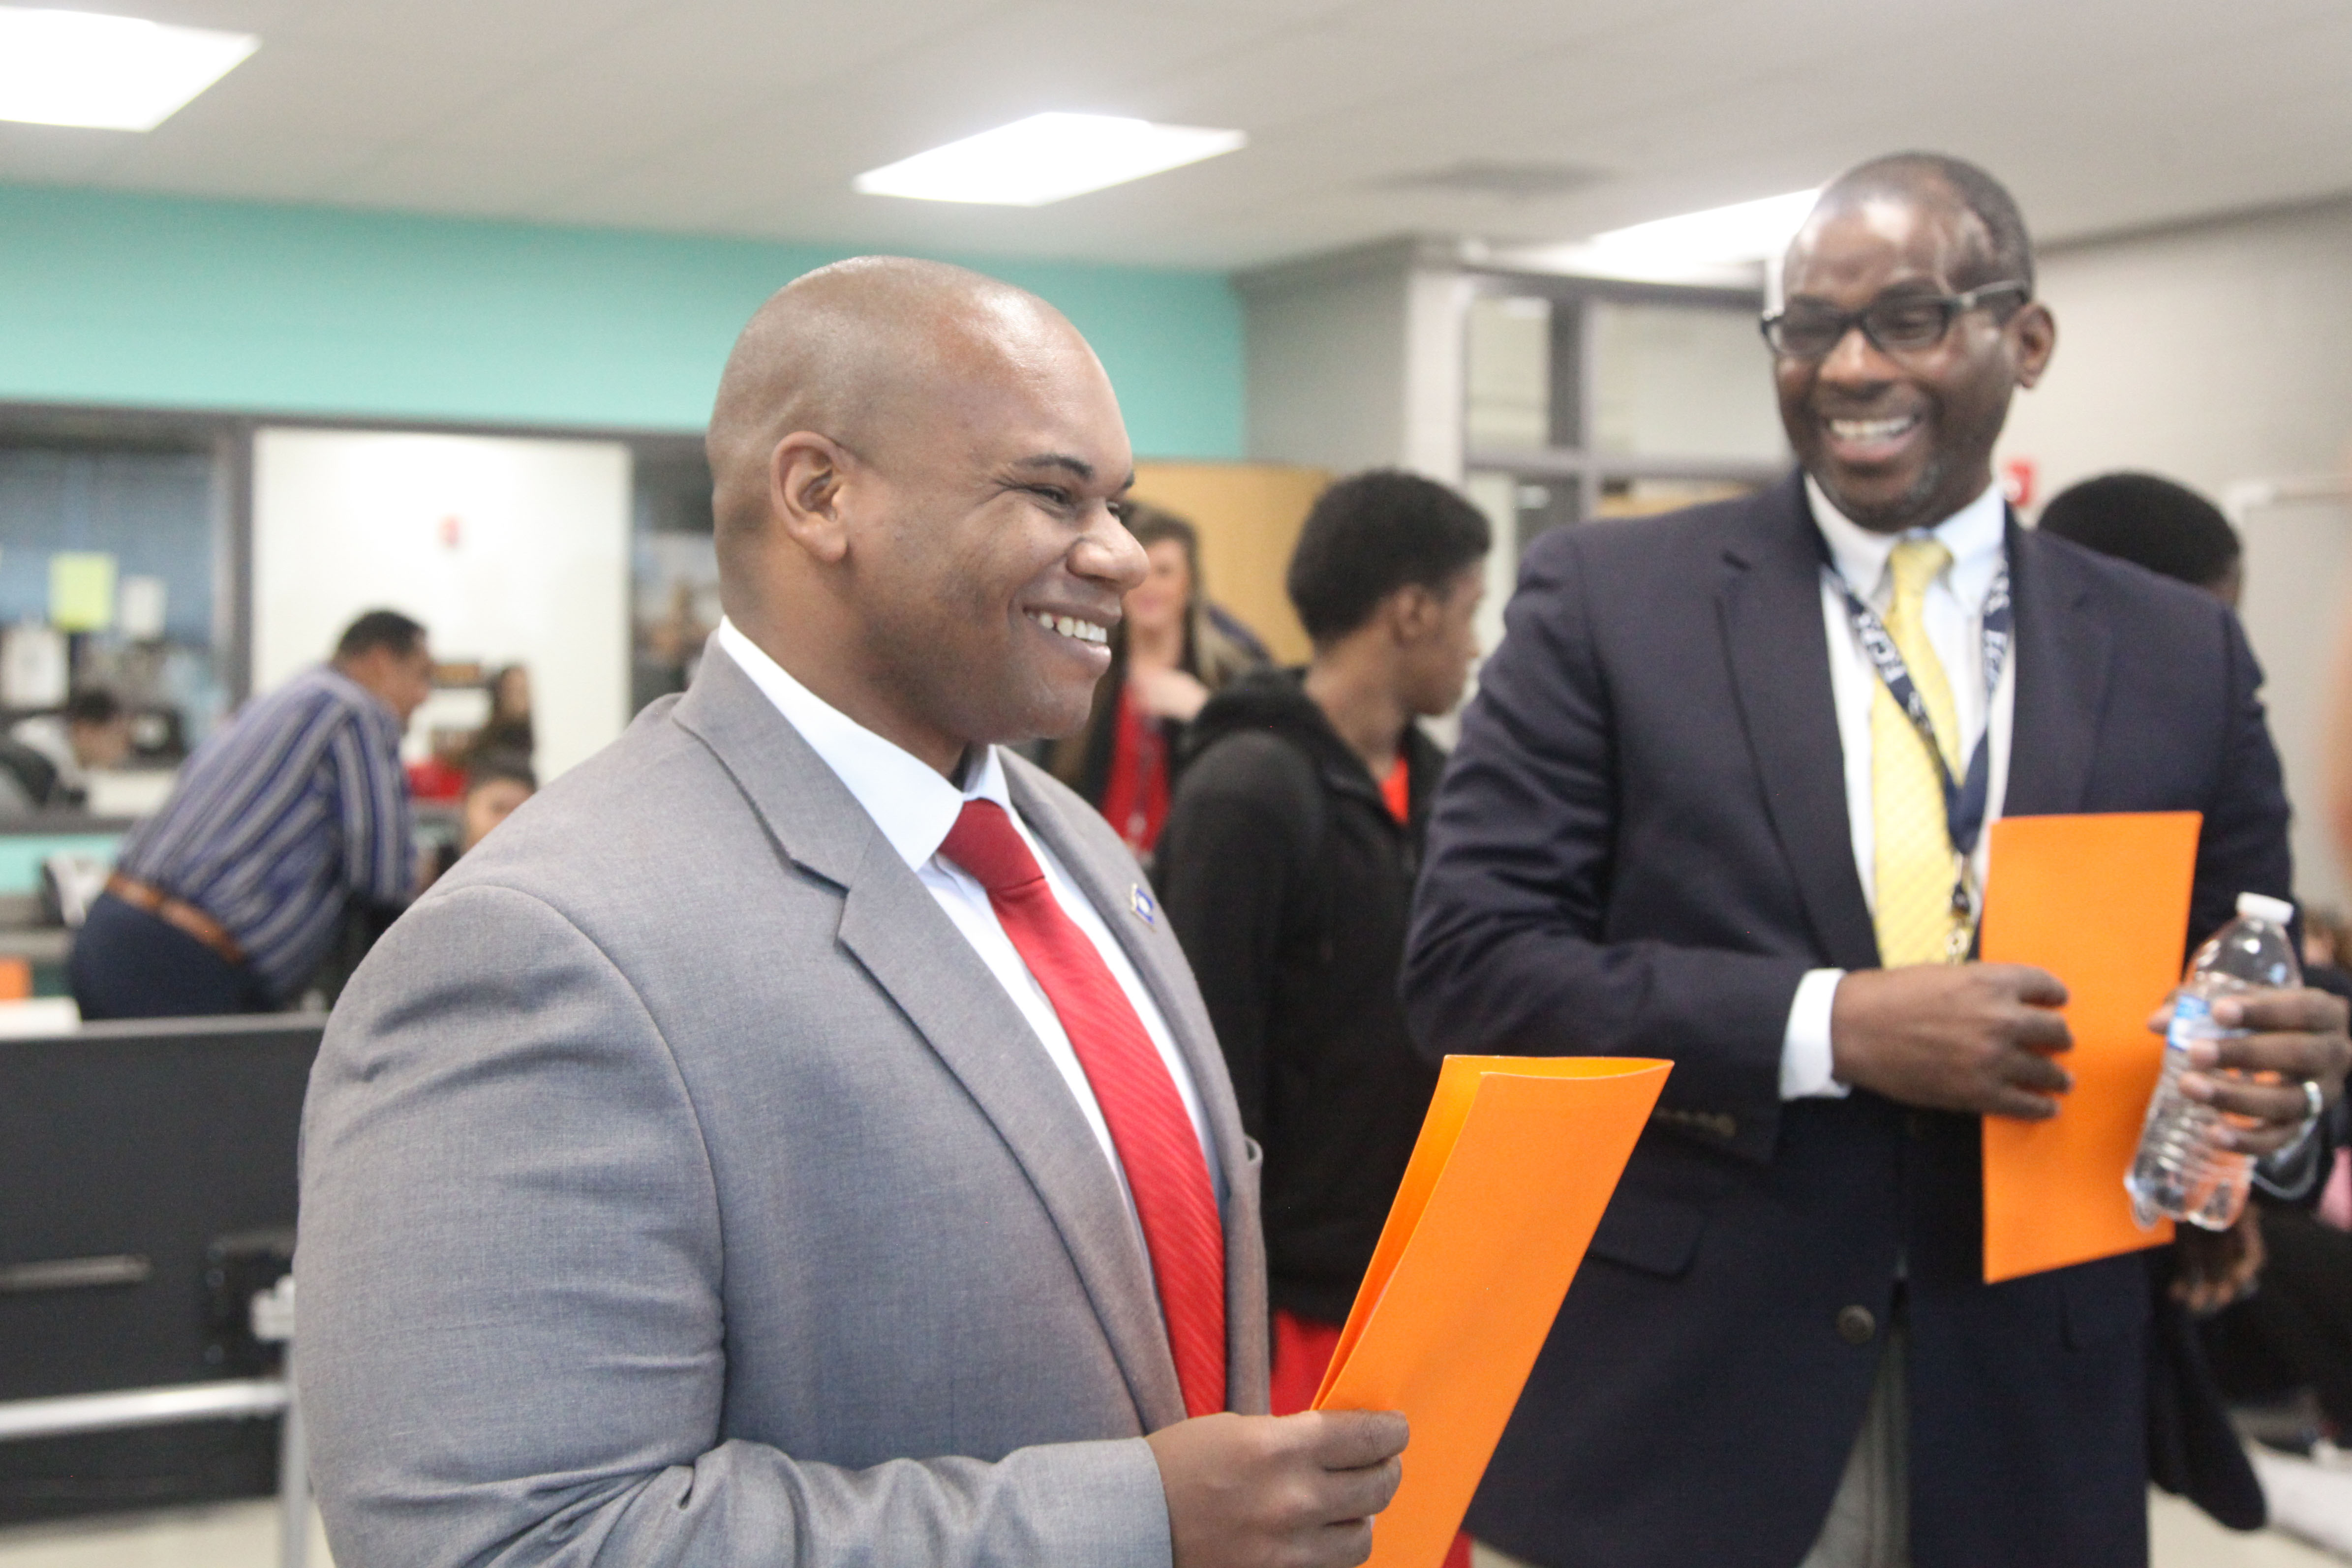 Commissioner of Education Wayne Lewis, left, talks with Fayette County superintendent Manny Caulk during a visit to Frederick Douglass High School (Fayette County). Lewis said he has always been in awe of great teaching, and that he looks for it during school visits. Photo by Megan Gross, Dec. 3, 2018